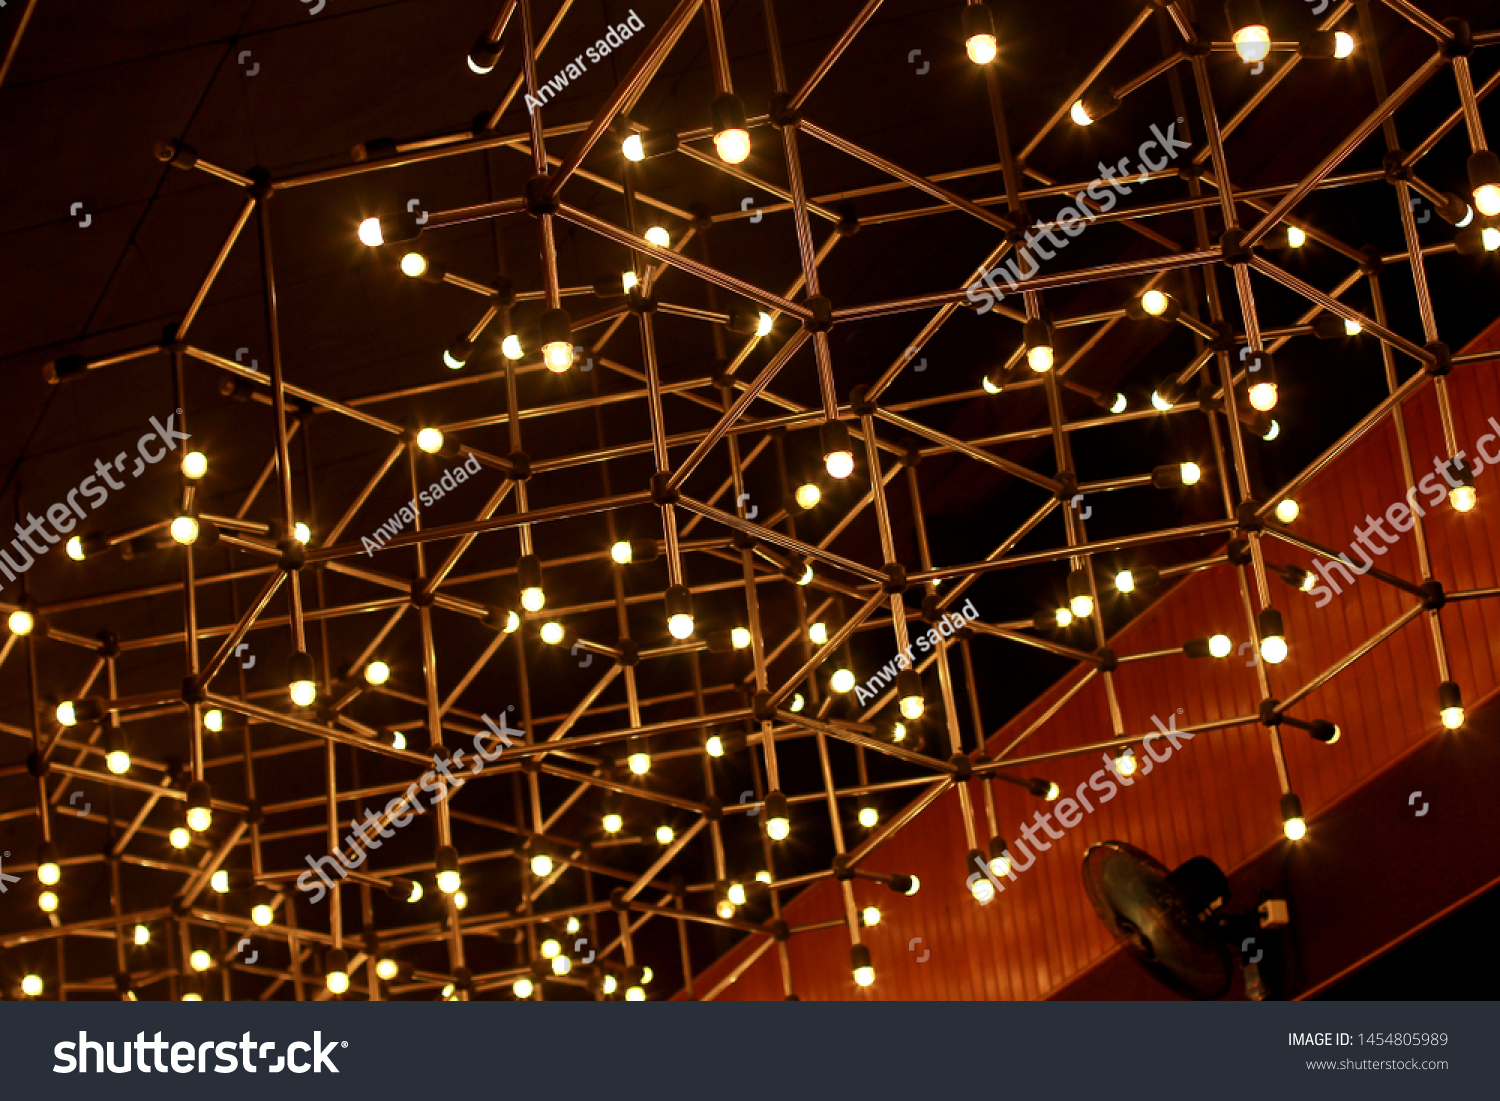 Hanging Lights Like Stars On Ceiling Royalty Free Stock Image